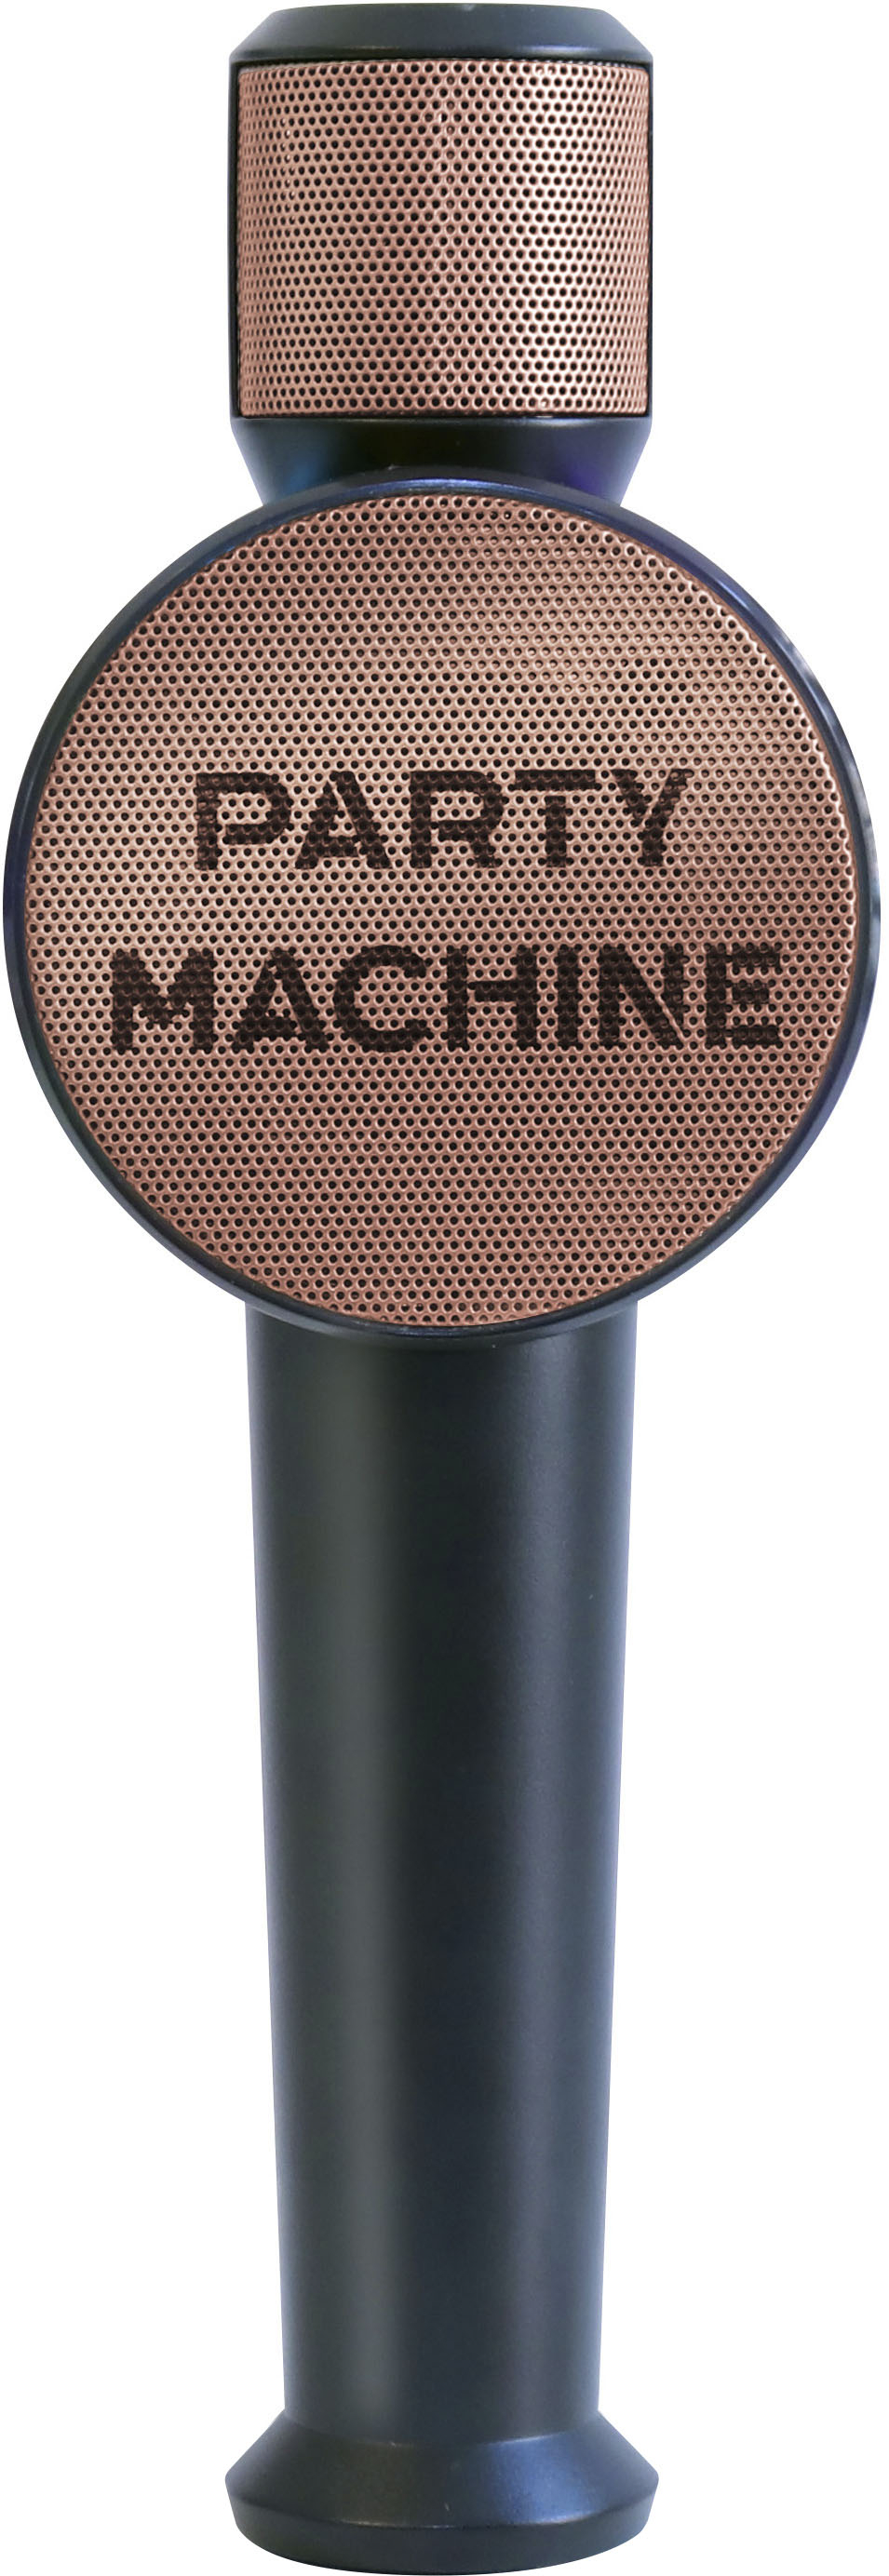 Back View: Singing Machine - Party Machine Mic - Rose Gold - Rose Gold and Black